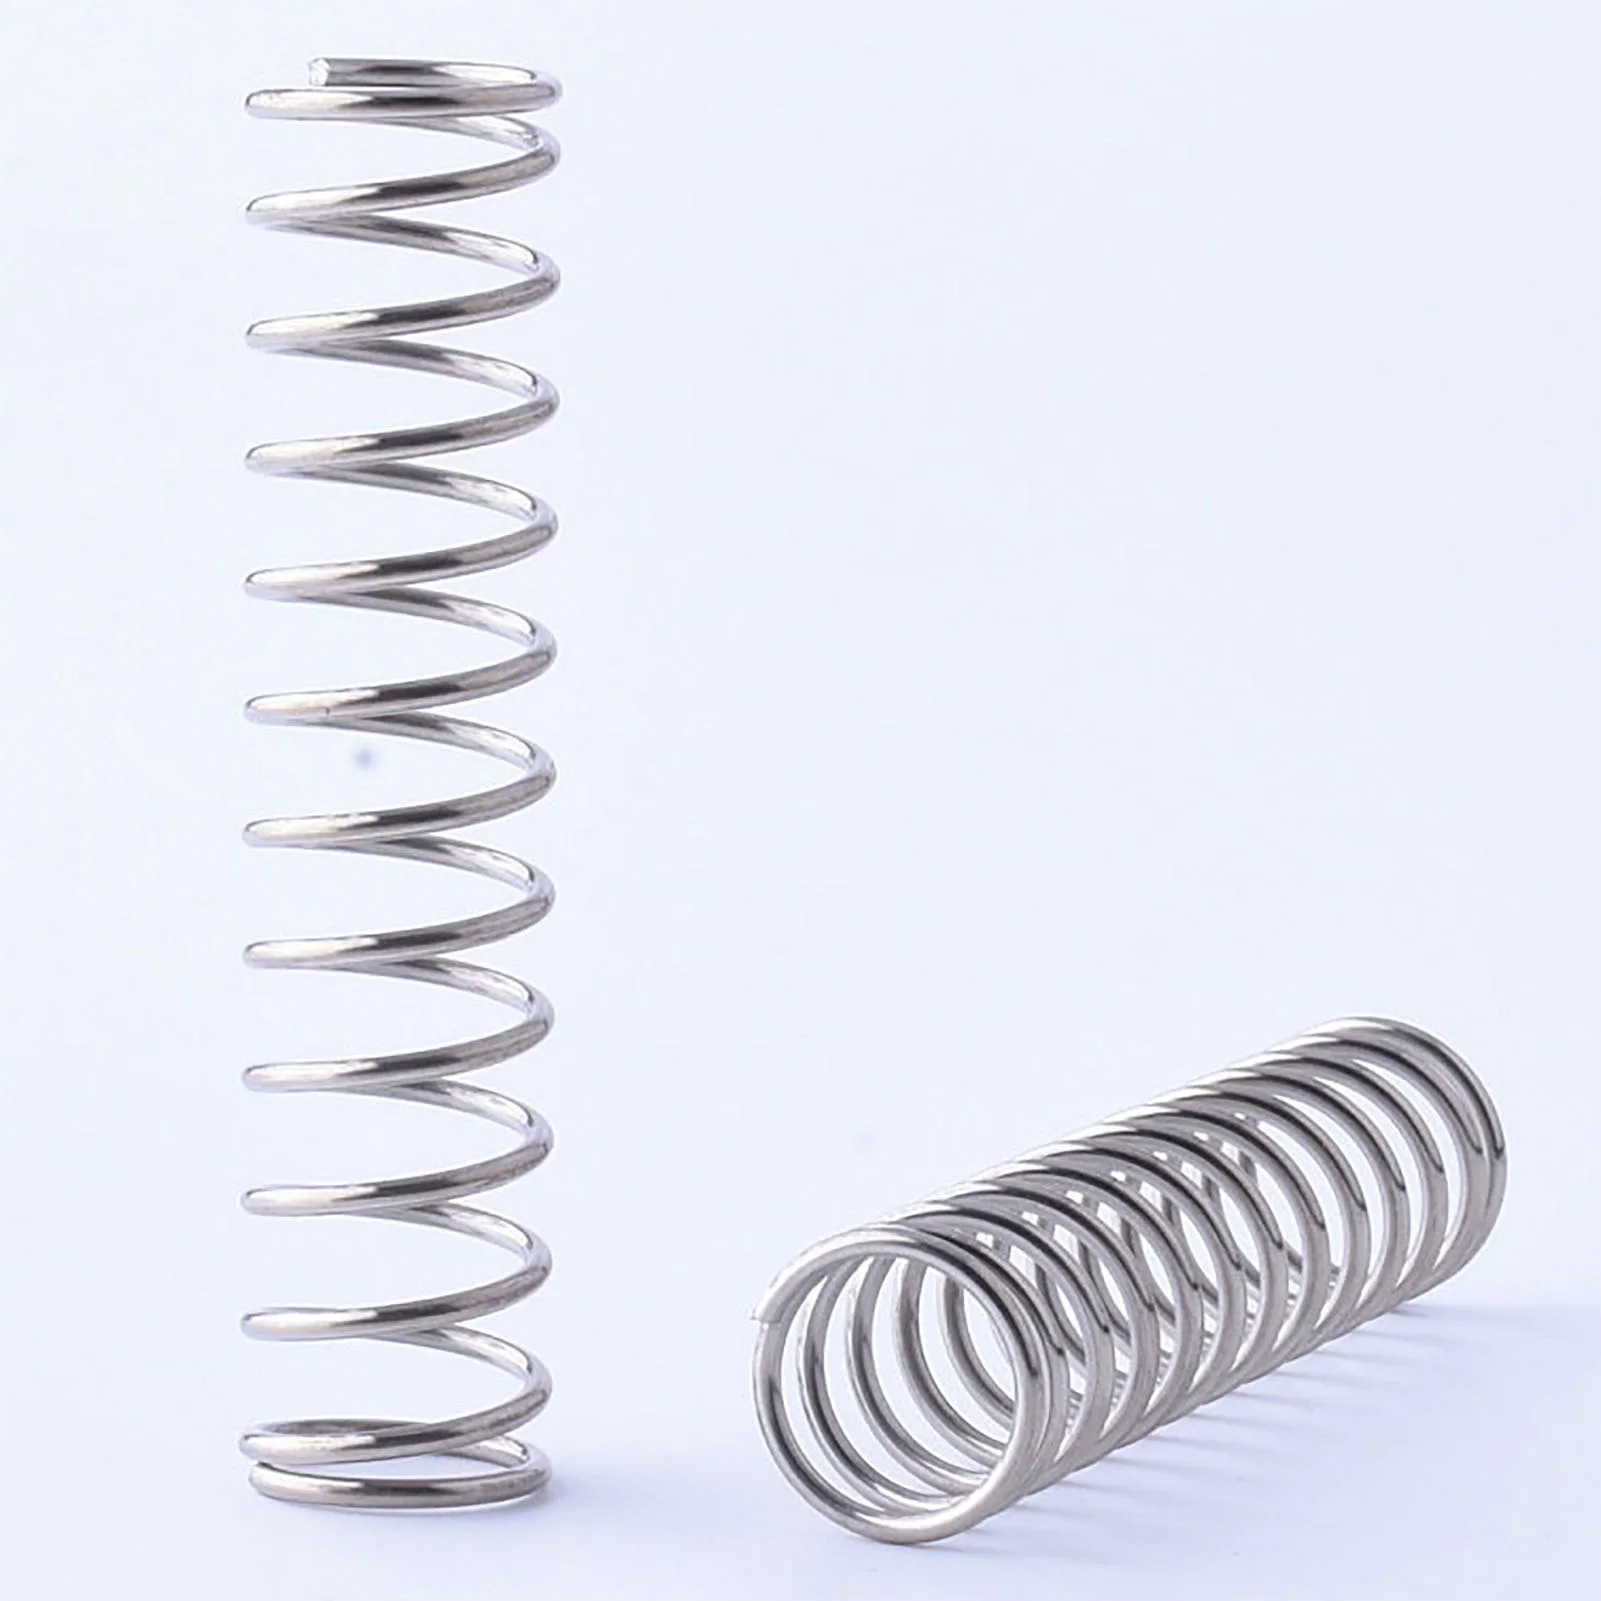 

5PCS 1.8x21mm Compression Spring, Wire Diameter 0.07'', Outer Diameter 0.82'', Free Length 0.39''-2'', Stainless Steel